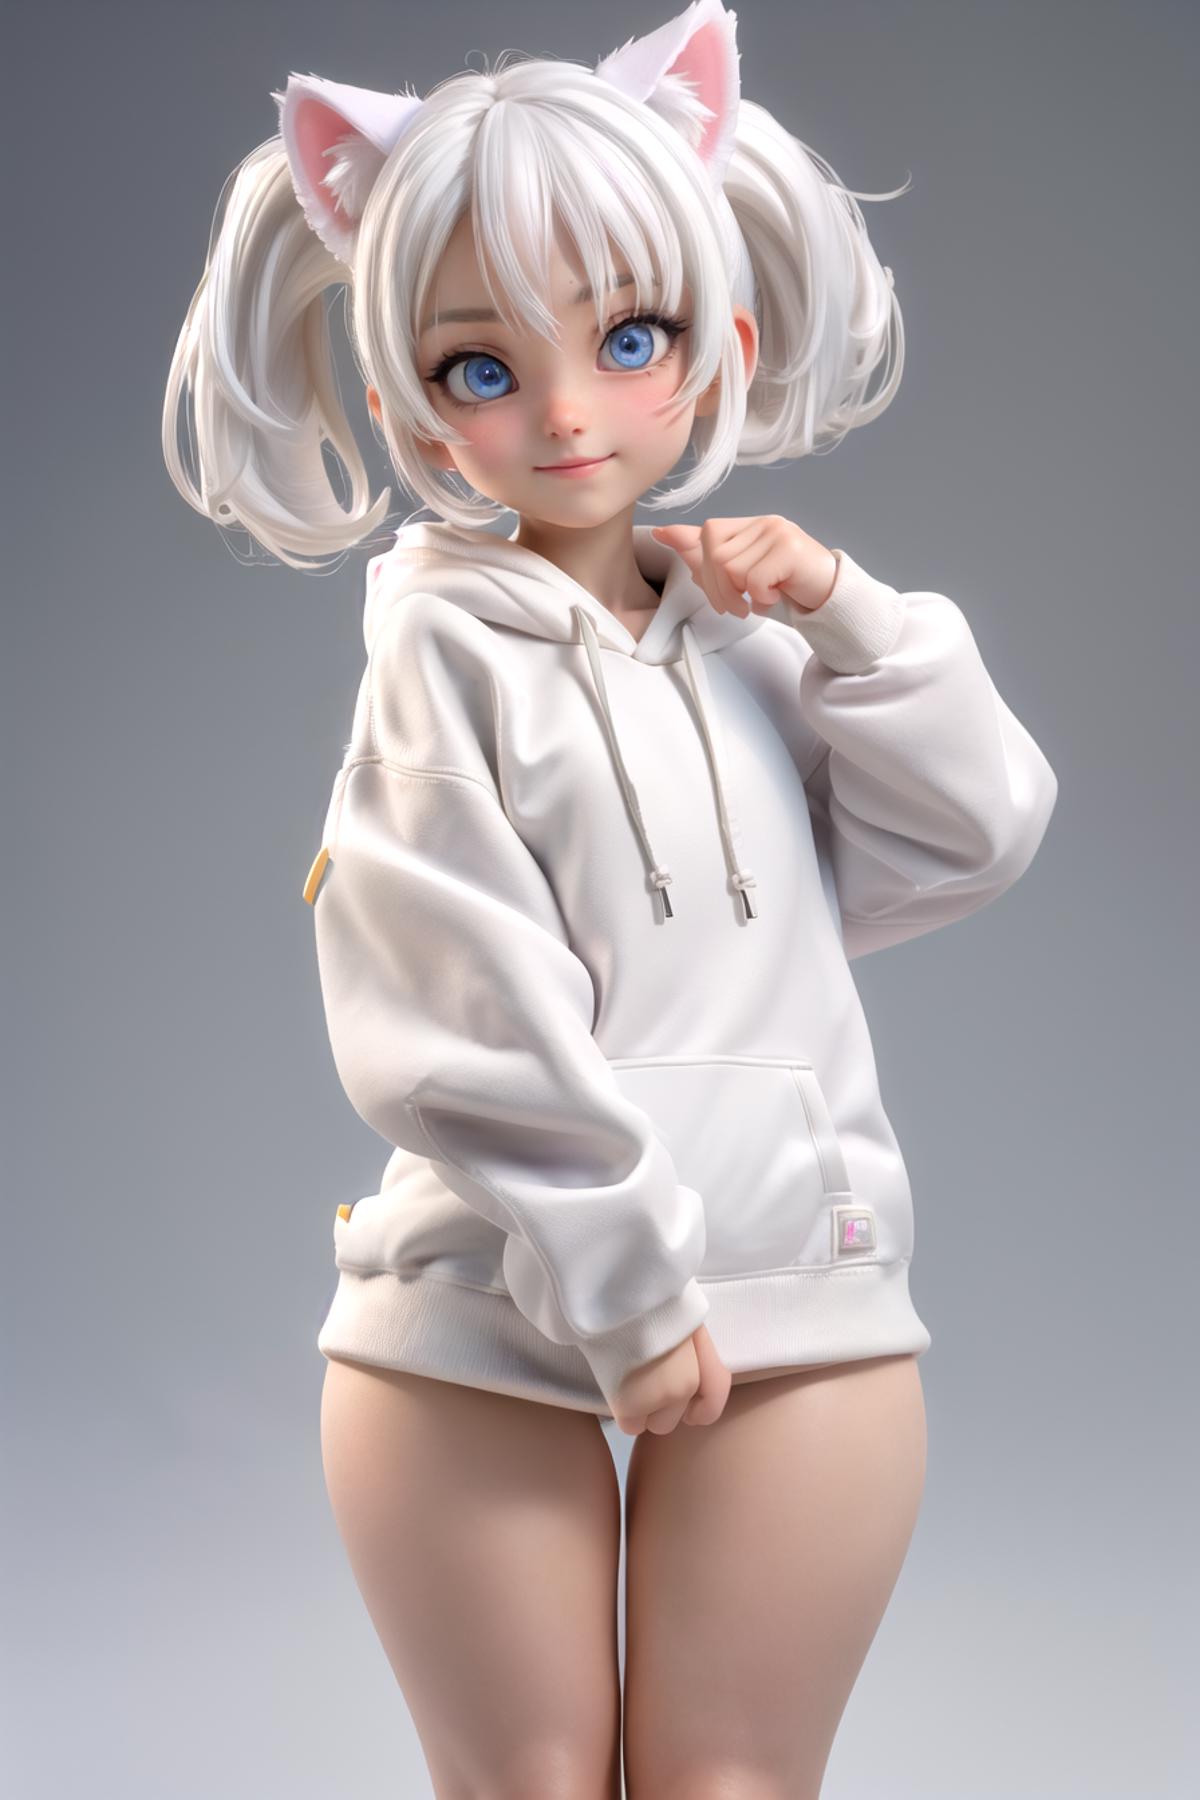 A doll with a white sweatshirt and blue eyes is posing for a picture.